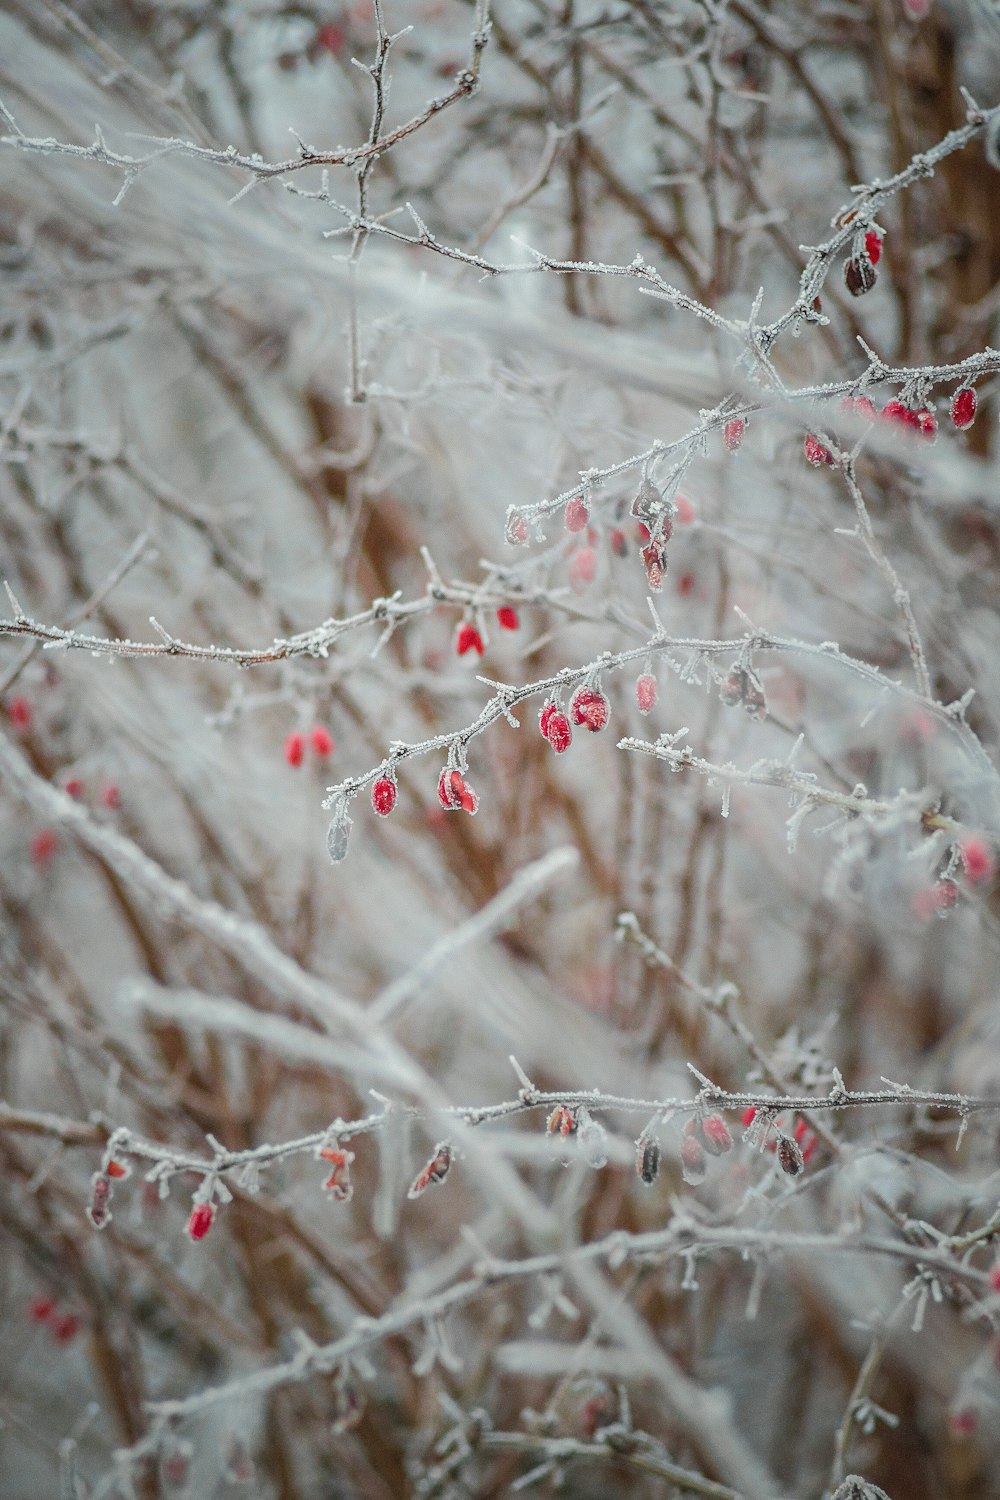 a branch with red berries on it in the snow